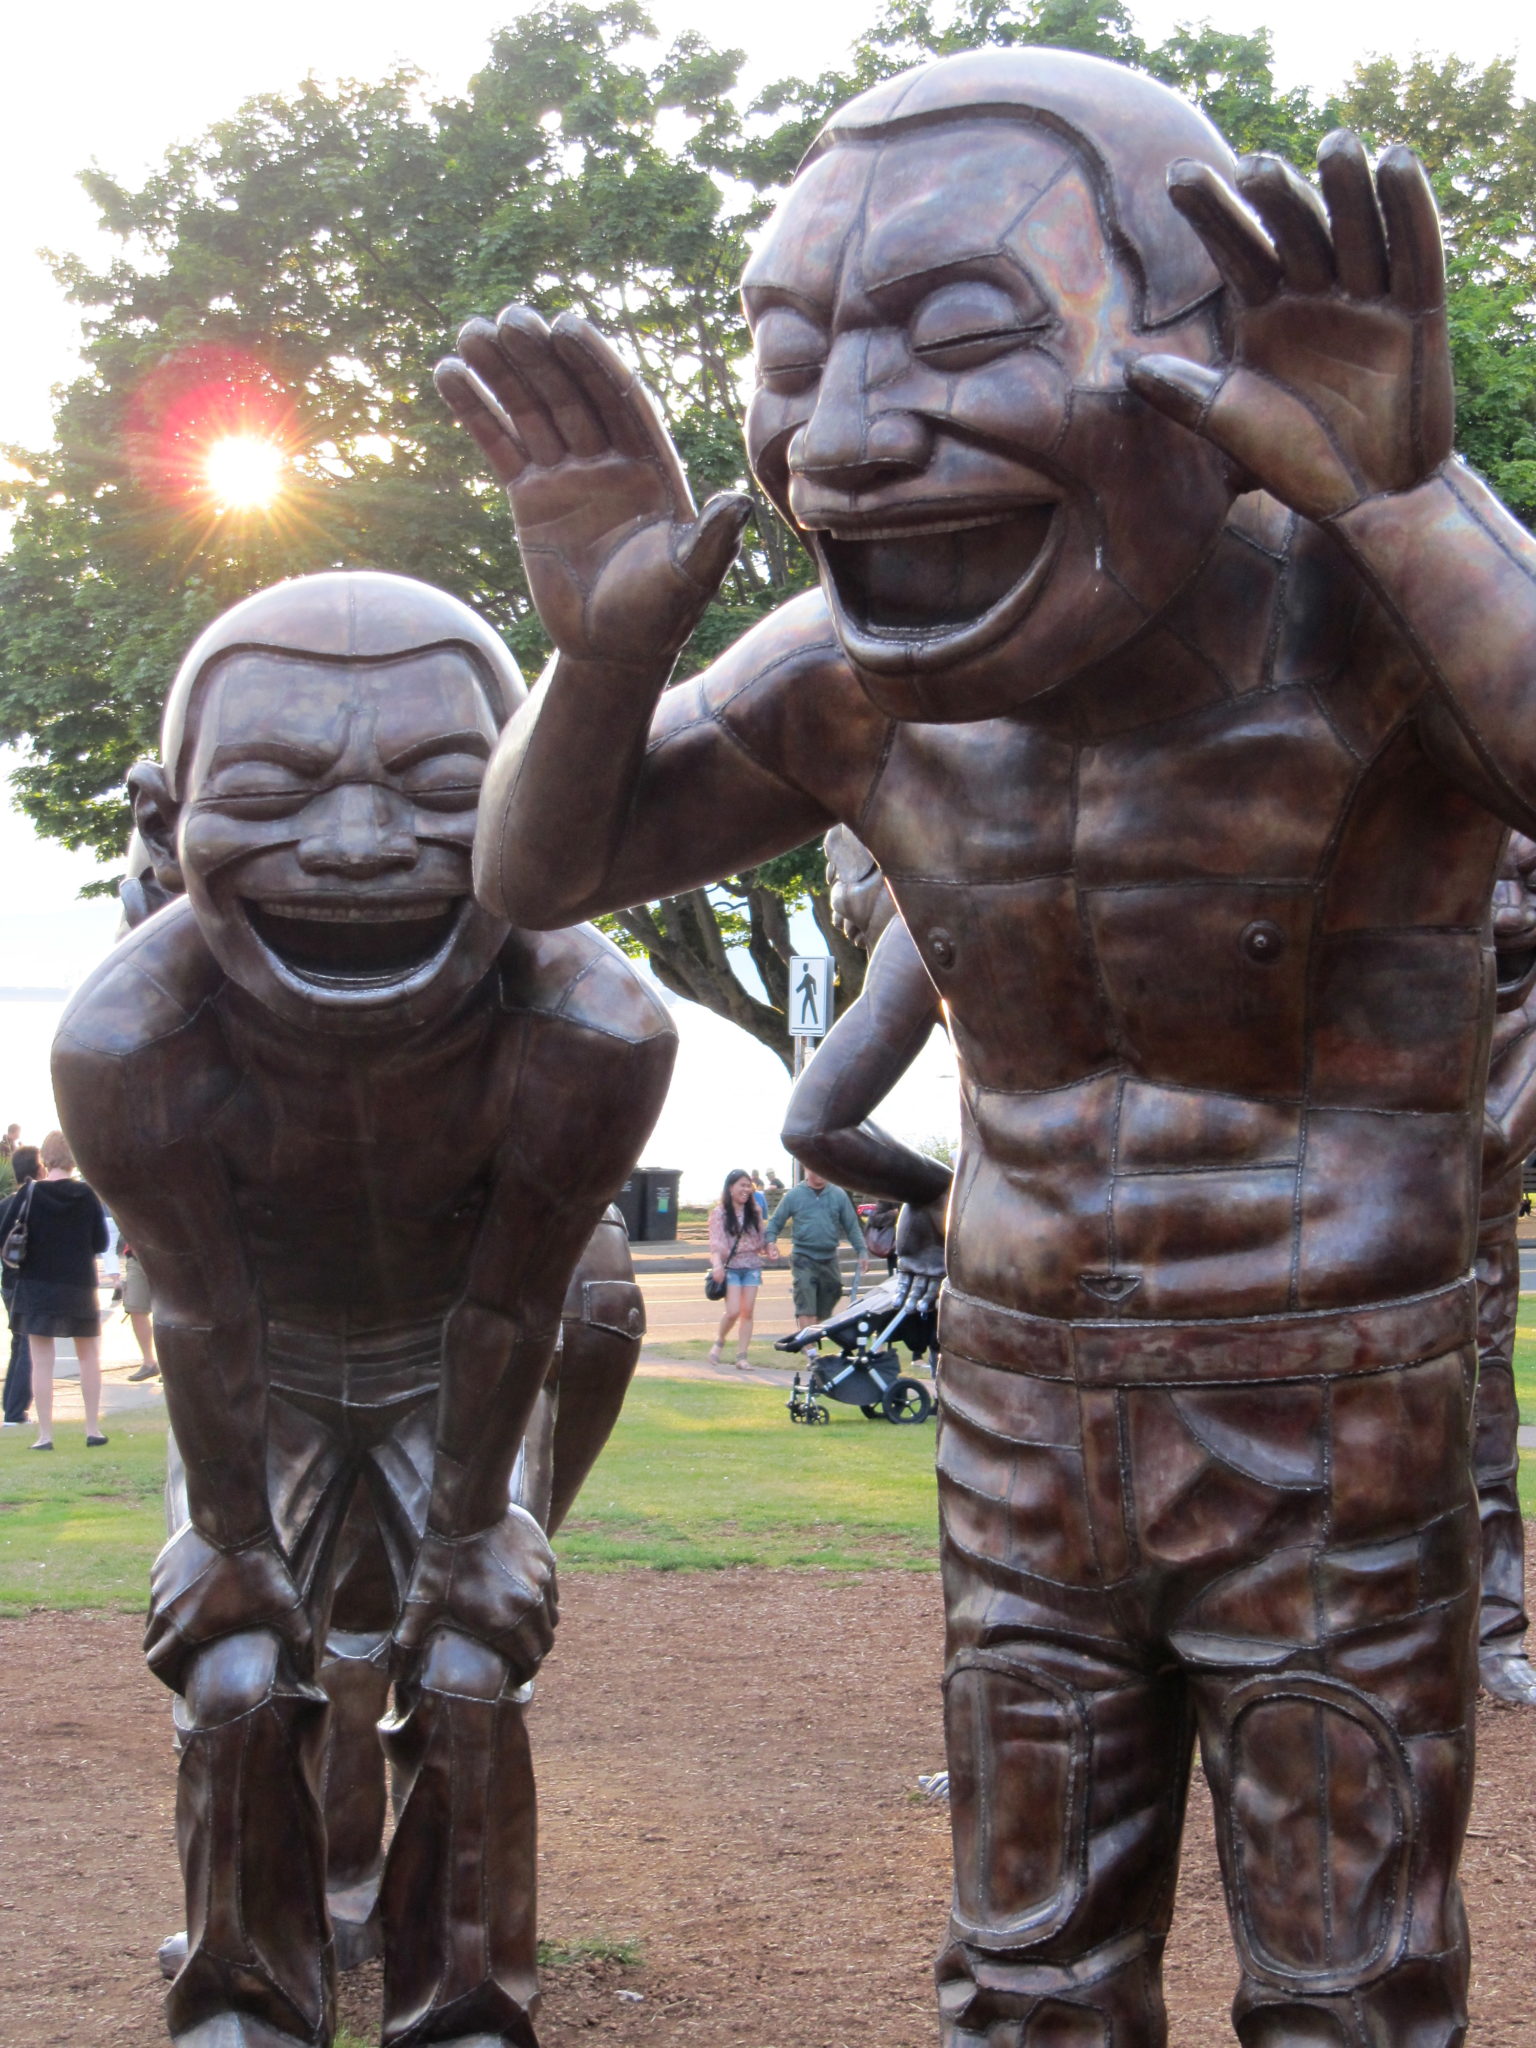 The laughing statues of Denman Street